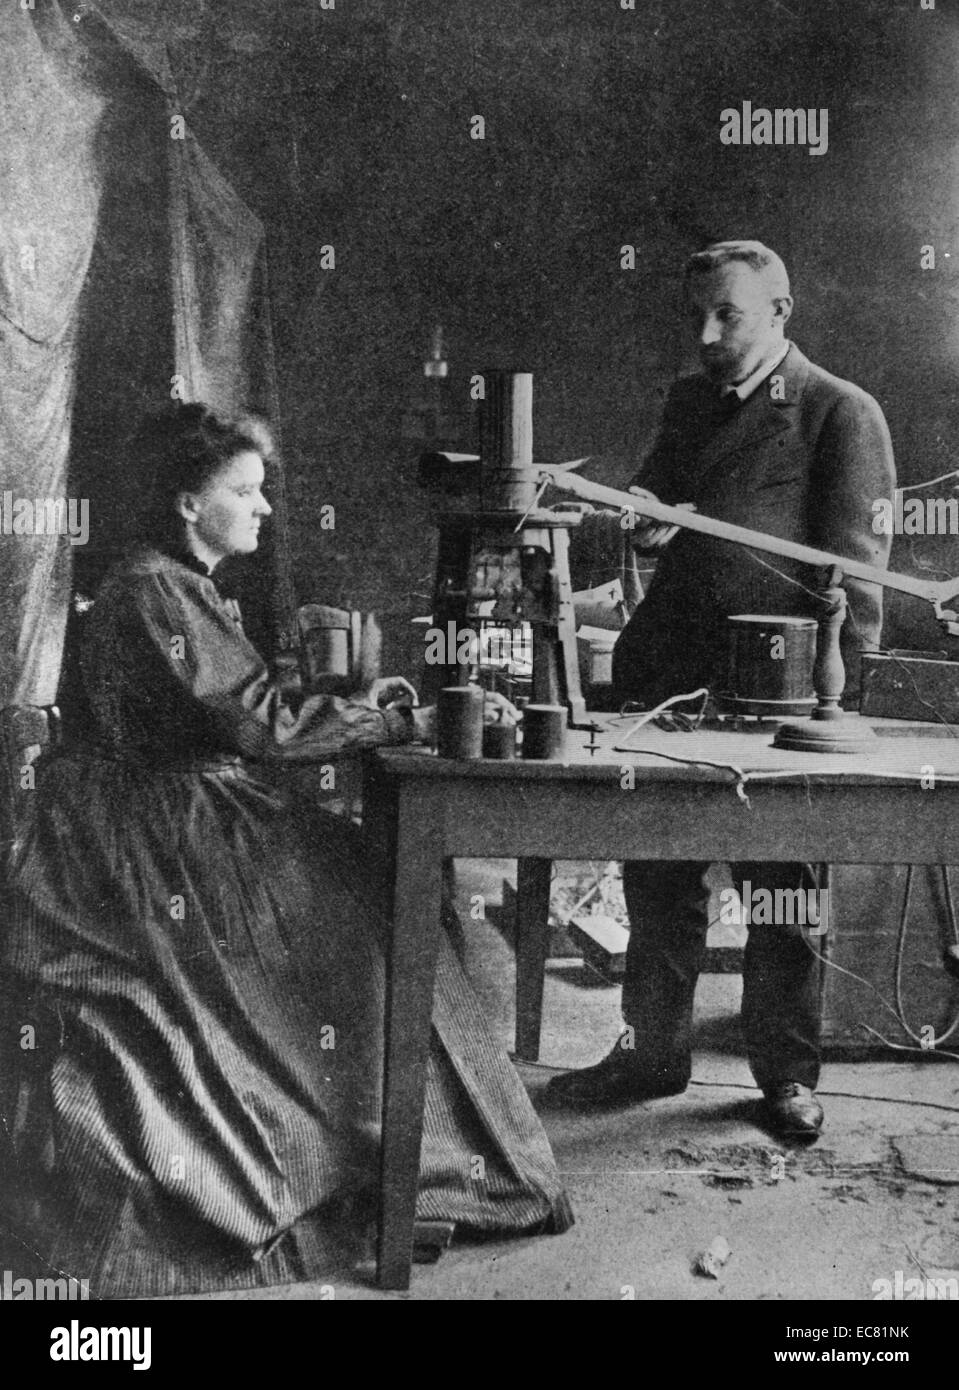 Photograph of Marie Sklodowska-Curie (1867-1934)  a Polish and naturalized-French physicist, Nobel Prize winner and chemist who conducted pioneering research on radioactivity, with her husband Pierre Curie (1859-1906) a French physicist, Nobel Prize winner, and a pioneer in crystallography, magnetism, piezoelectricity and radioactivity. Dated 1906 Stock Photo